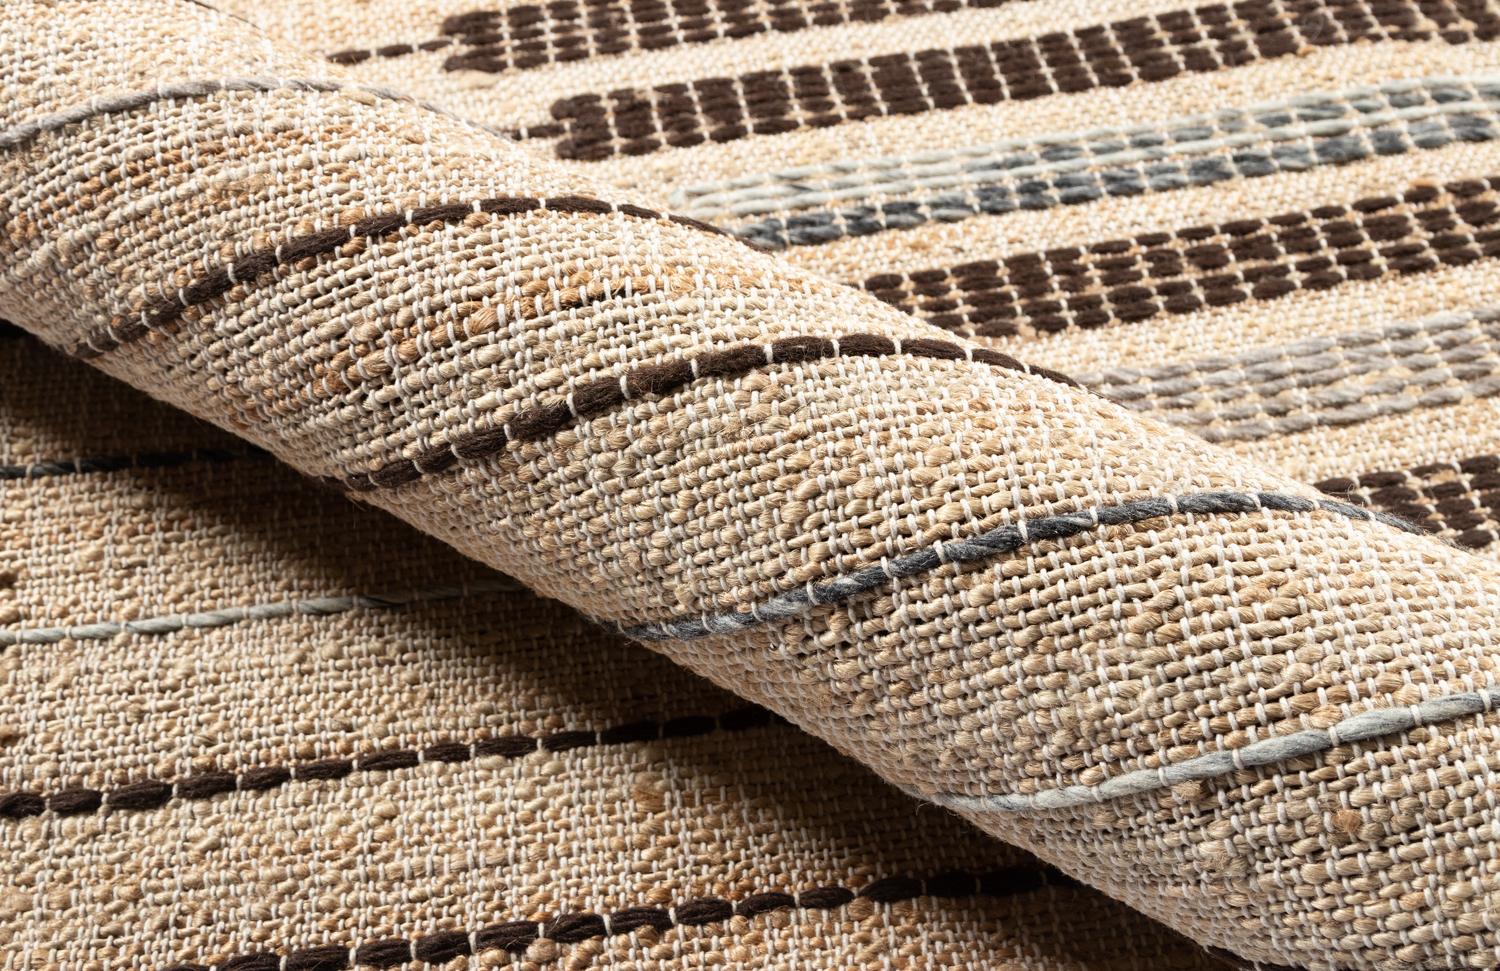 With a reverence for symmetry and simple geometric shapes, the Argan Collection was inspired by traditional African mud cloth patterns. Made from a handwoven combination of jute and wool, each rug possesses a perfectly imperfect look. The evidence